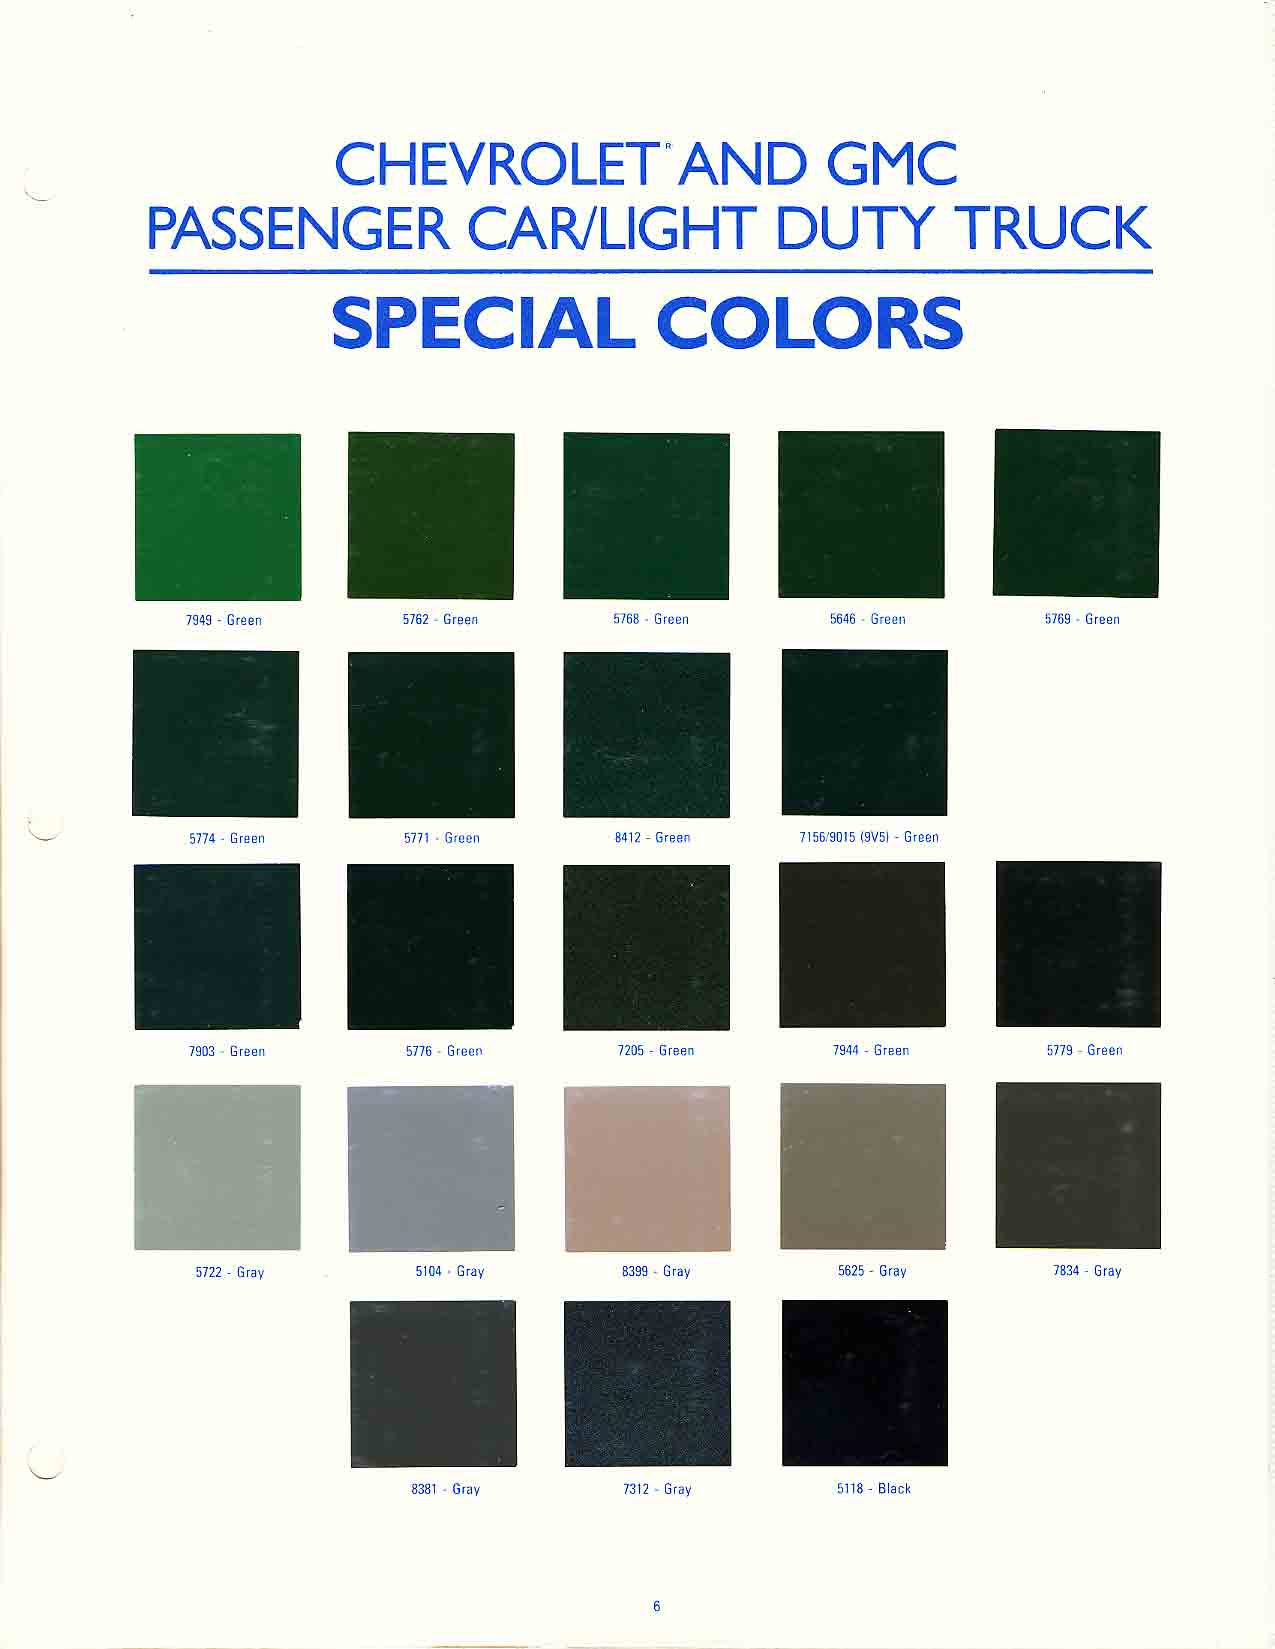 Chevrolet and GMC Truck Color Chart